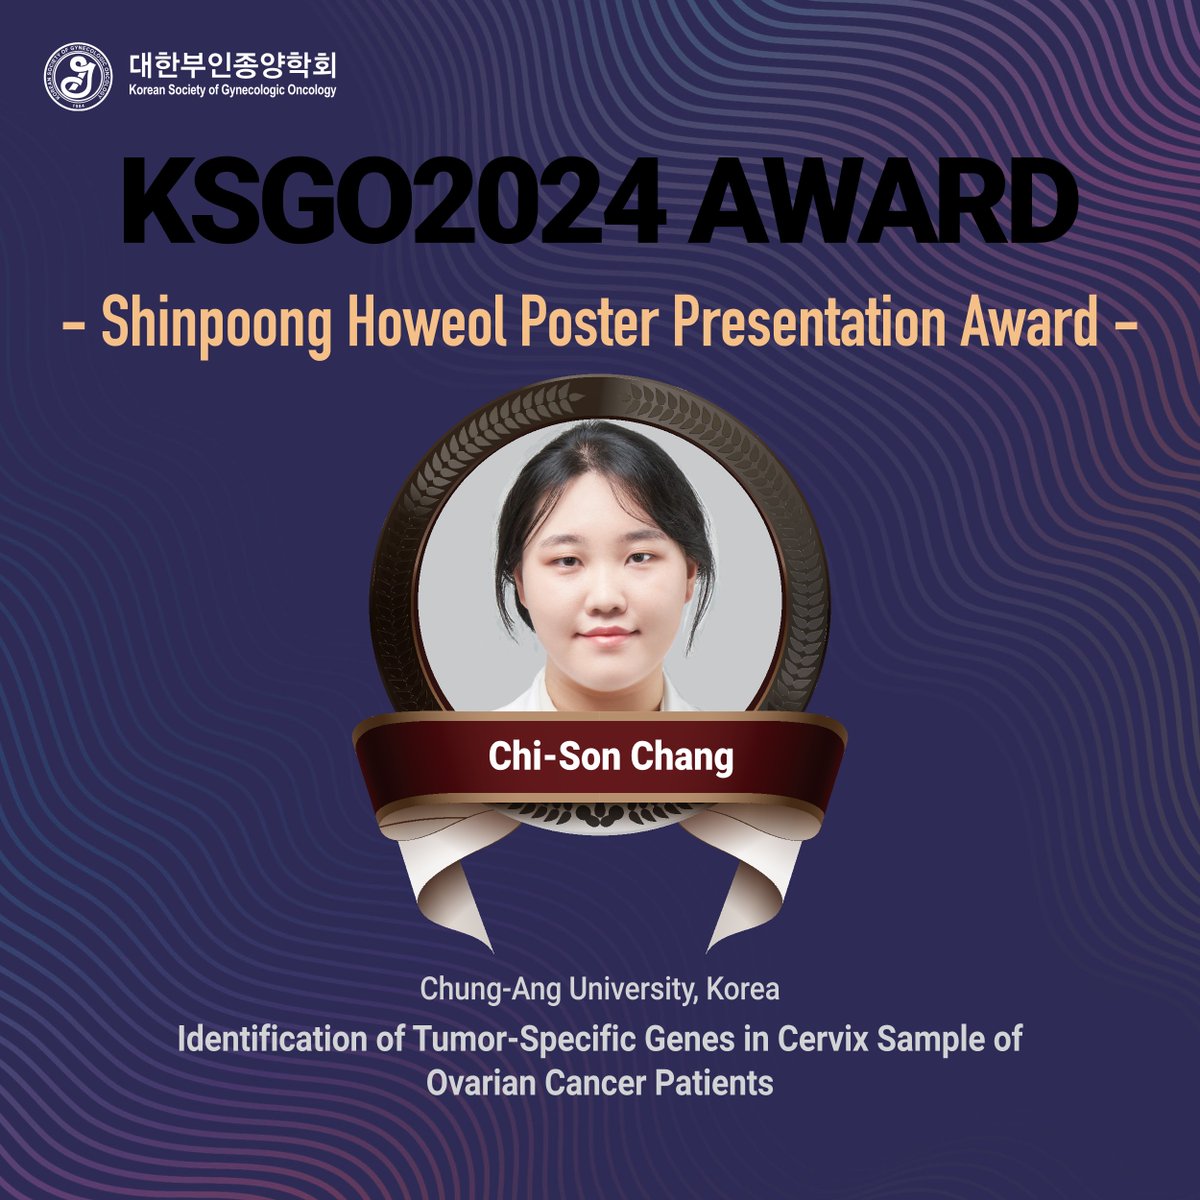 🏆 Congratulations to the remarkable doctors awarded at #KSGO2024 for their outstanding oral and poster presentations! Your innovative work in #GynecologicOncology is paving the way for future advancements. Bravo! 👏